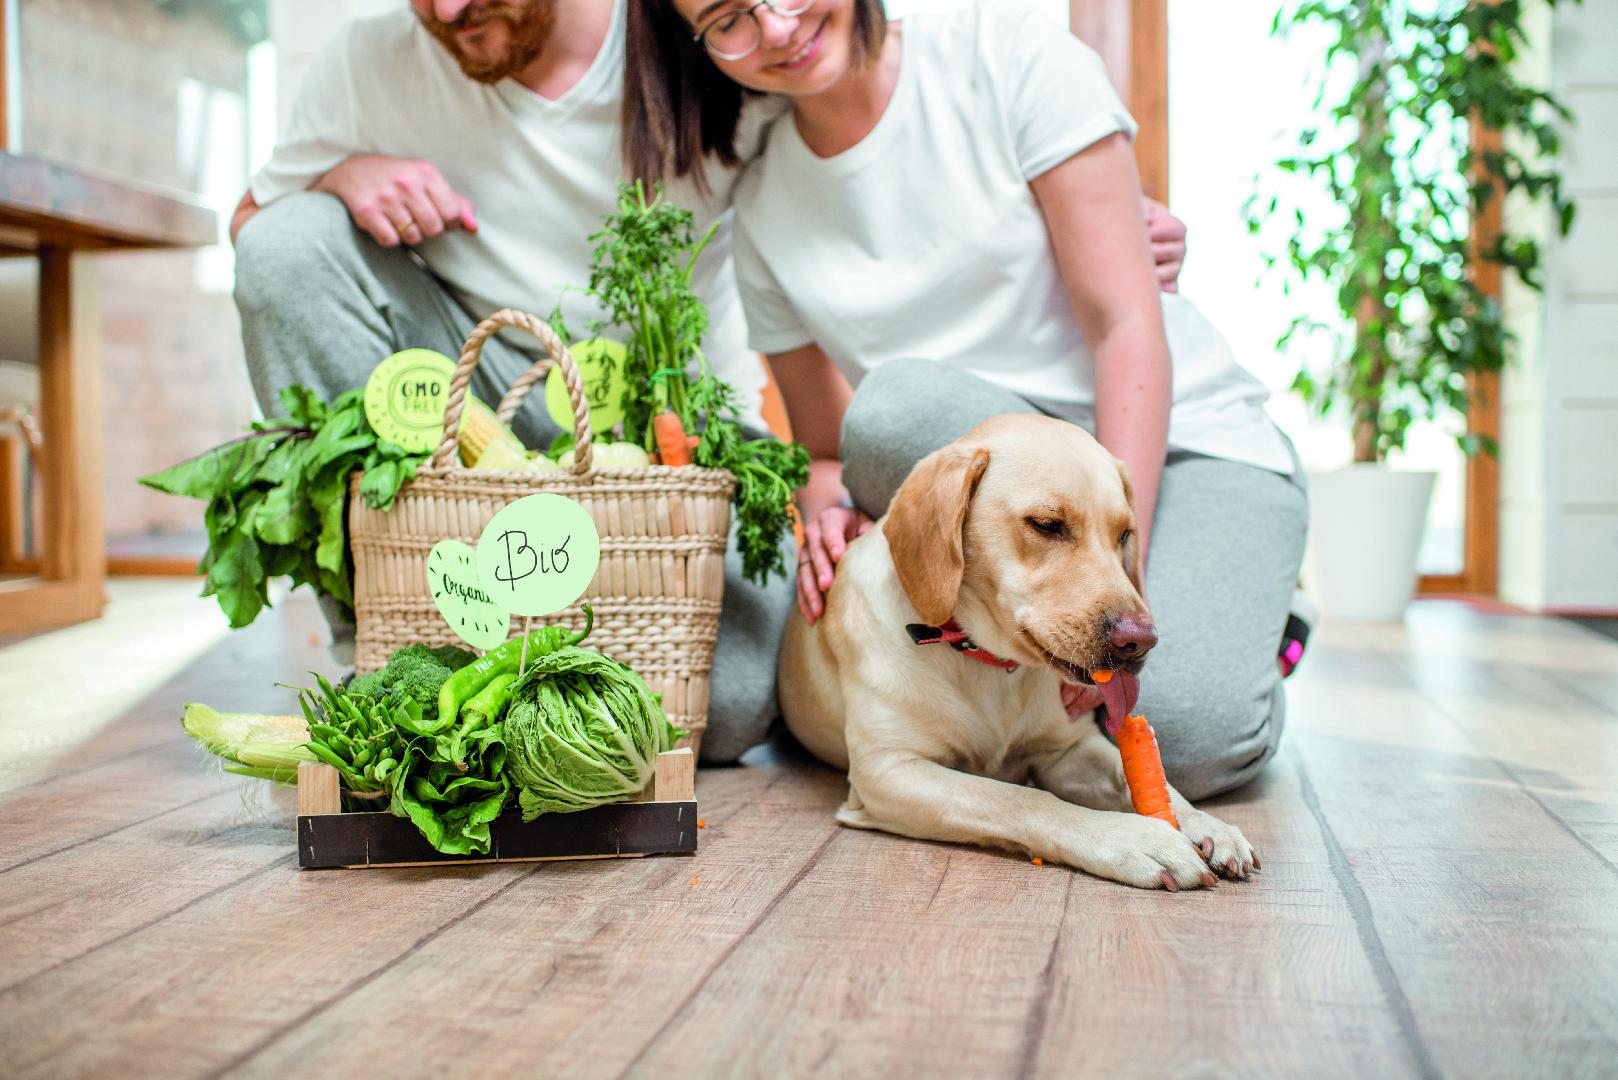 Nutritional alternatives to improve the quality of pets life